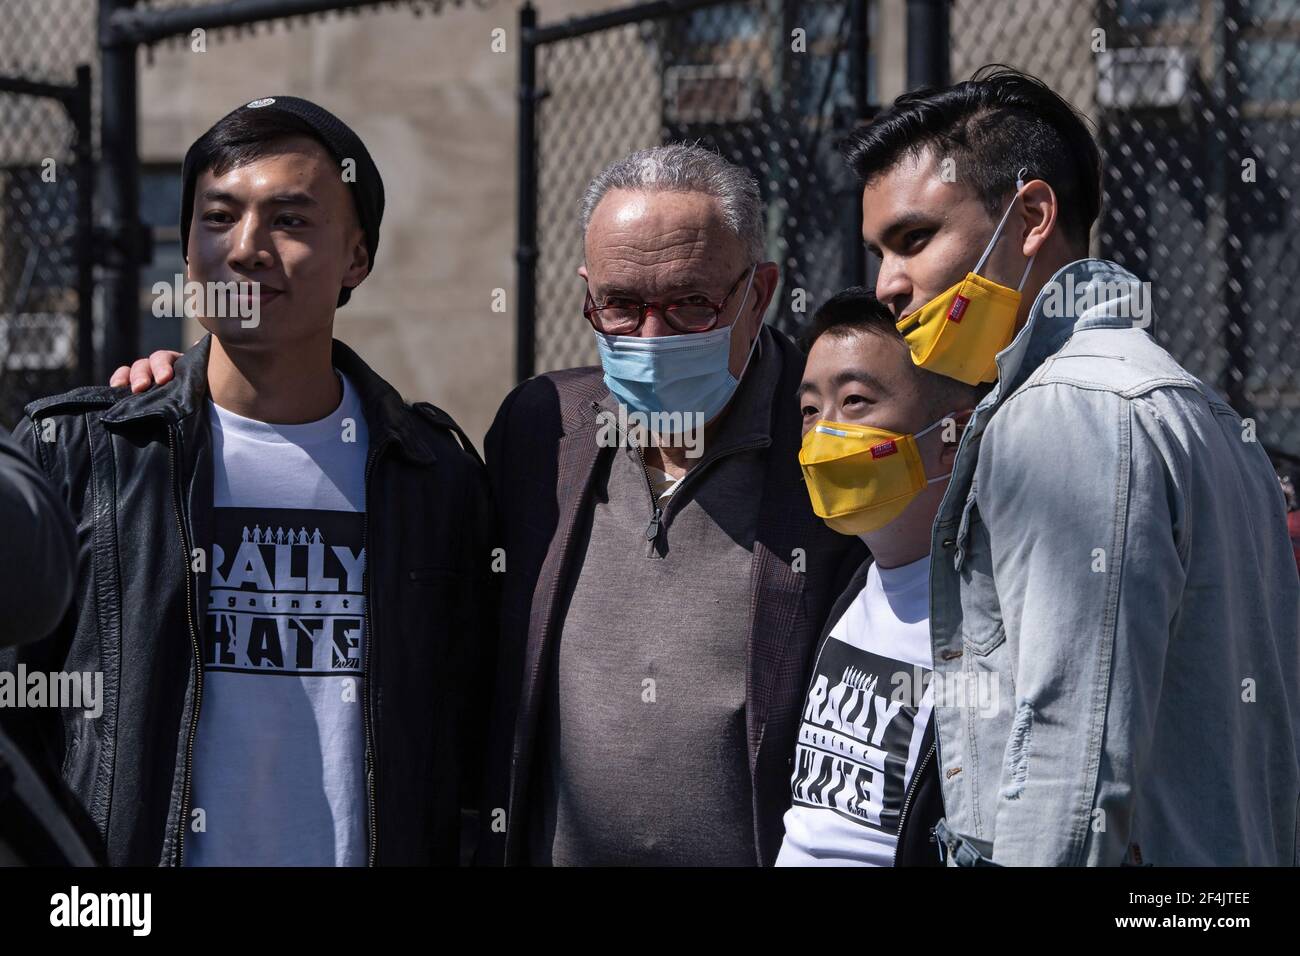 Senate Majority Leader Chuck Schumer (D-NY) poses with Oliver Pras and activists during a rally against hate in Columbus Park in the Chinatown neighbourhood of Manhattan in New York City.A rally for solidarity was organized in response to a rise in hate crimes against the Asian community since the start of the coronavirus (COVID-19) pandemic in 2020. On March 16 in Atlanta, Georgia, a man went on a shooting spree in three spas that left eight people dead, including six Asian women. (Photo by Ron Adar/SOPA Images/Sipa USA) Stock Photo